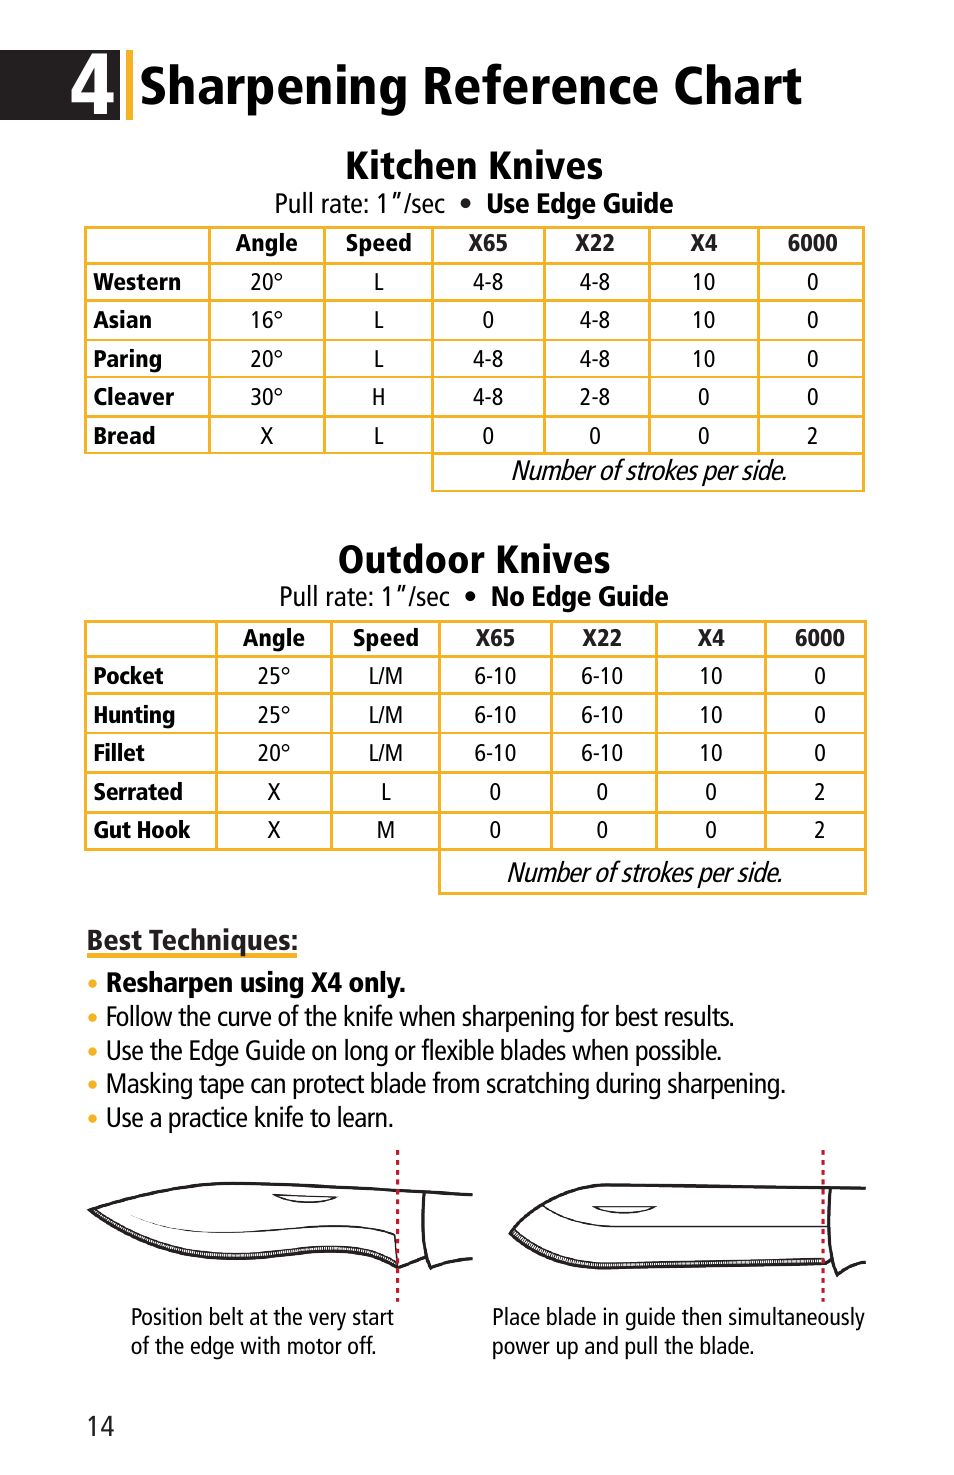 Sharpening reference chart, Kitchen knives, Outdoor knives Work Sharp